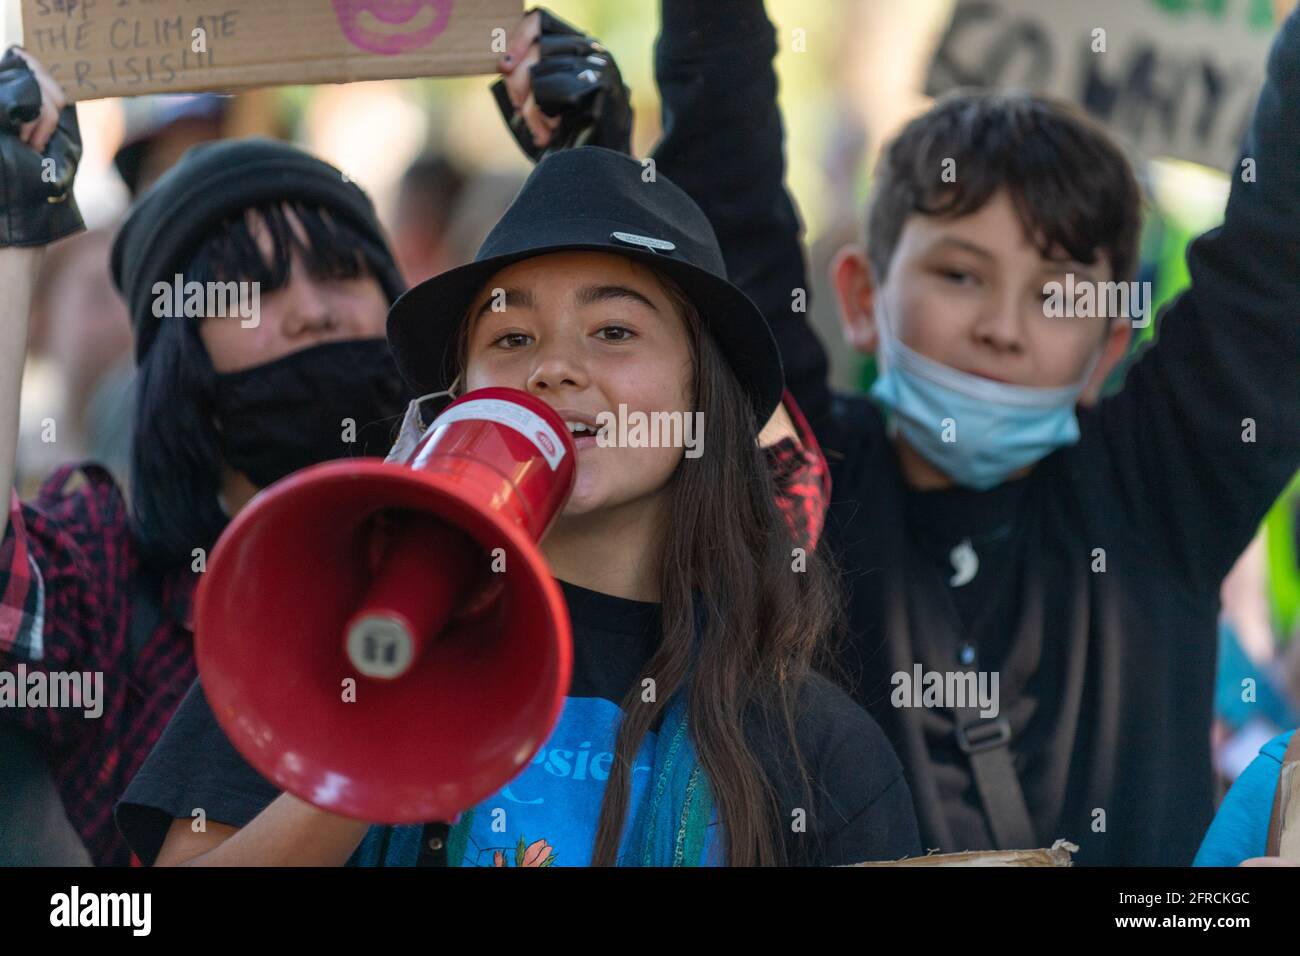 Melbourne, Australia 21 May 2021, A young girl uses a megaphone during a rally that brought 1000s of school students and supporters to the streets  of Melbourne for the 'Schools Strike 4 Climate' protests that called on governments around the world to take action on Climate change. Credit: Michael Currie/Alamy Live News Stock Photo